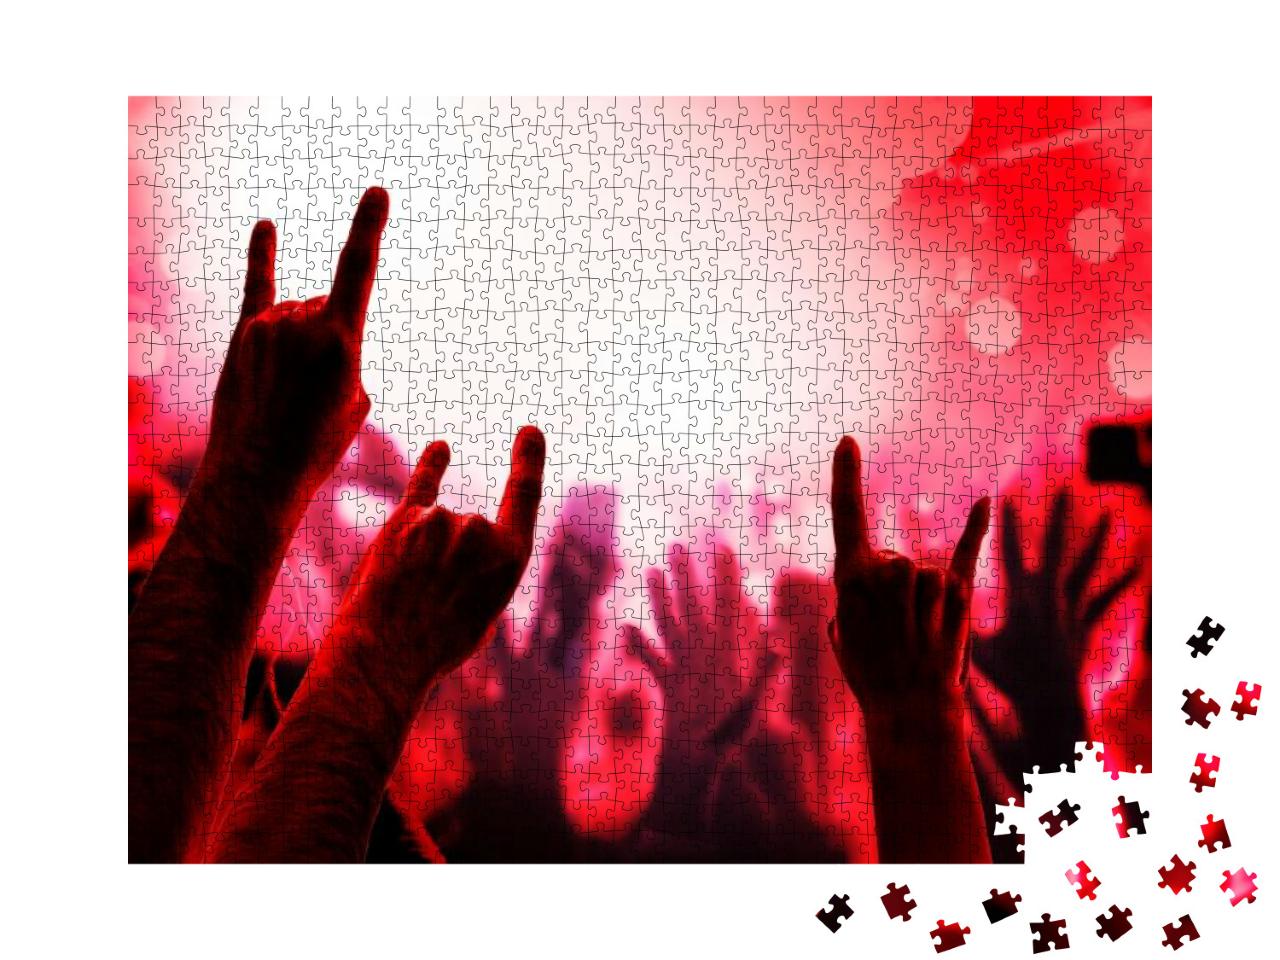 Crowd Fans Hand Silhouettes At Rock Pop Concert, Party, E... Jigsaw Puzzle with 1000 pieces